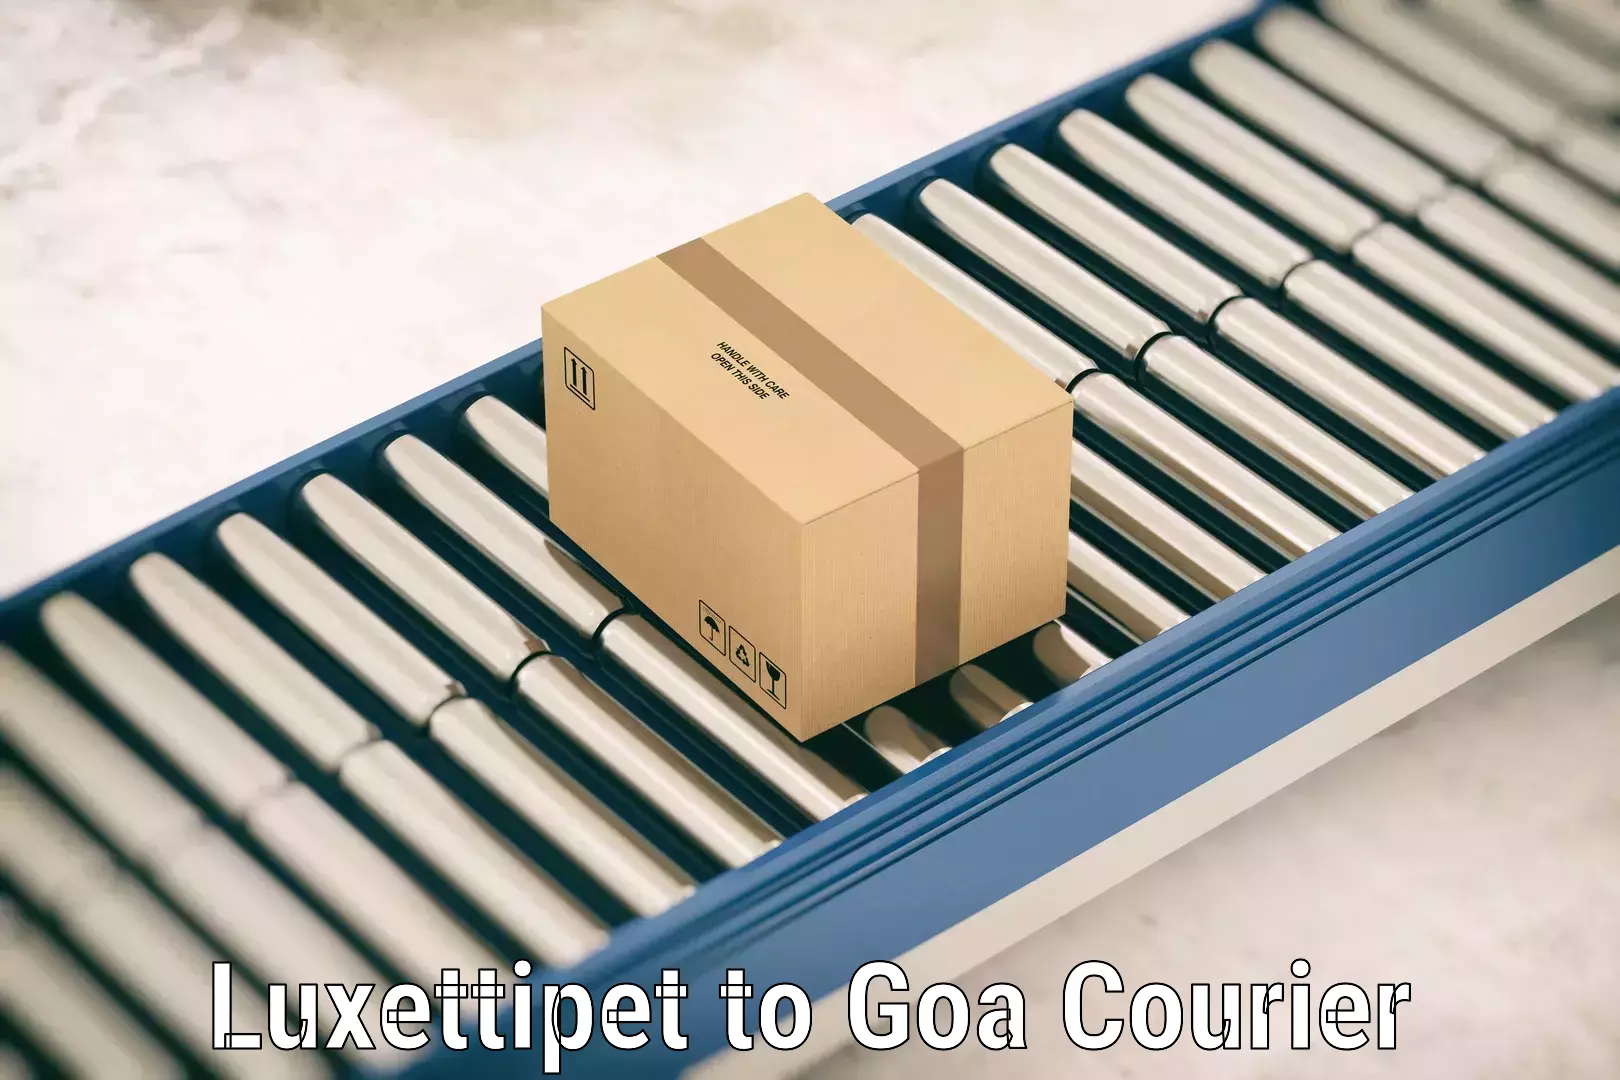 Doorstep luggage collection in Luxettipet to Goa